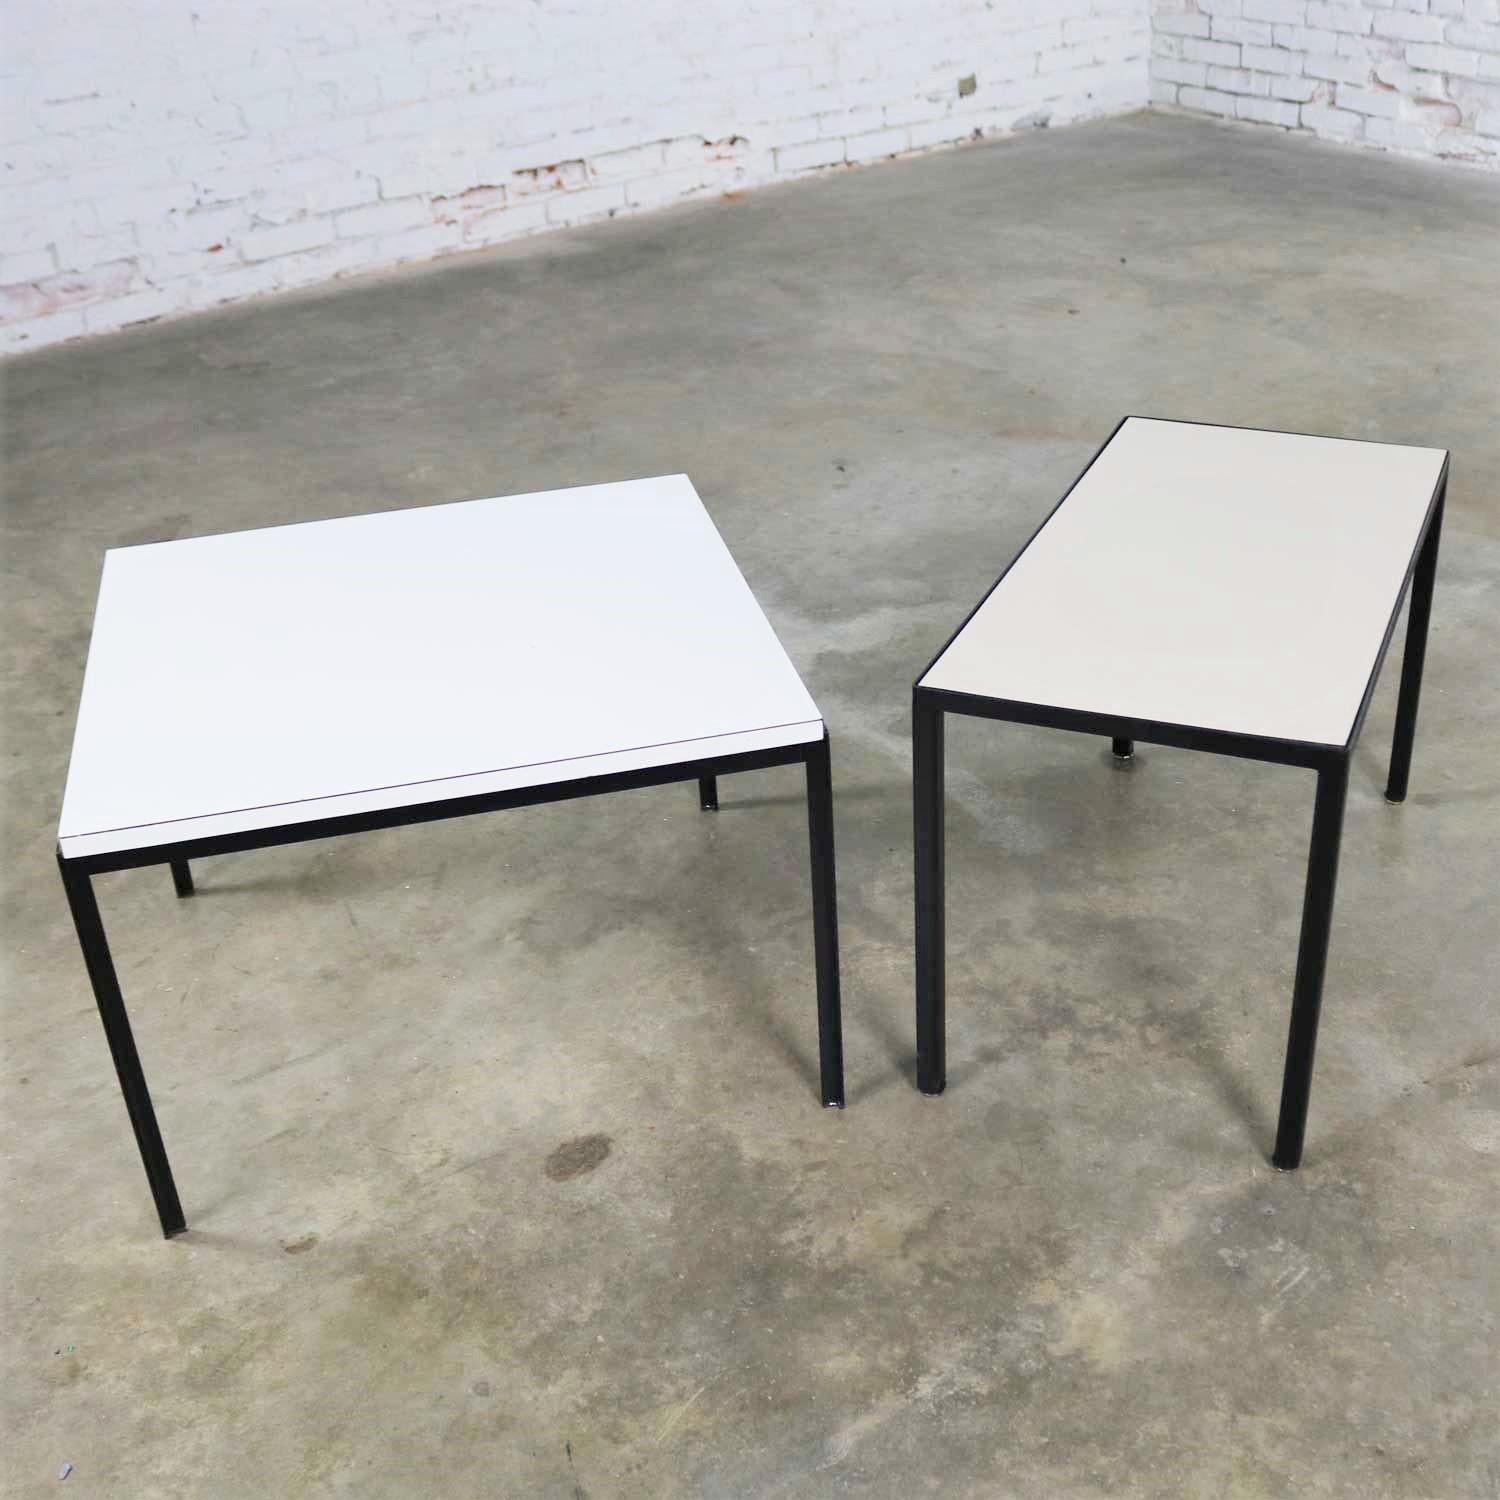 American Miss Matched Mid-Century Modern Black Wrought Iron Side Tables with Laminate Top